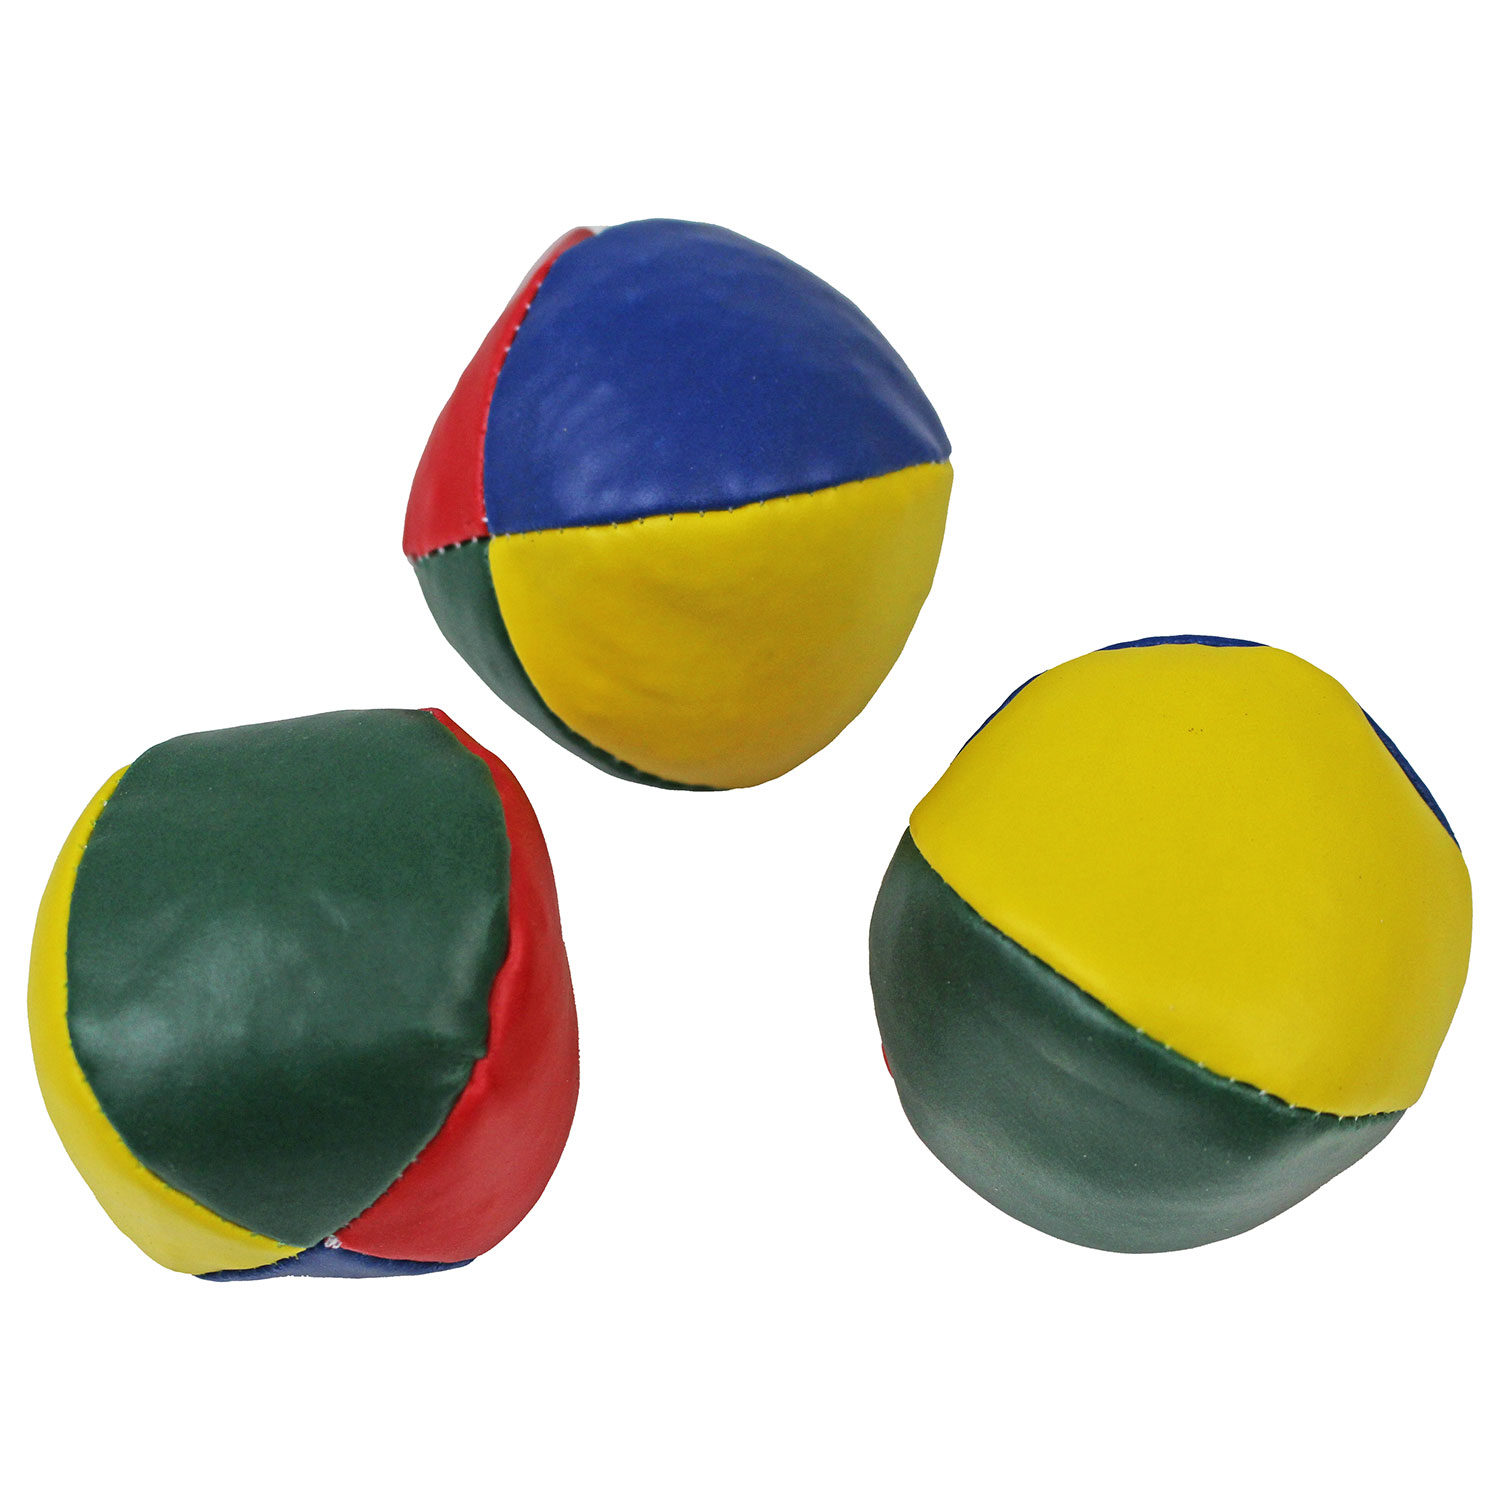 Juggling Sets Toys Juggling Ball with Net Bag Hand Throw Indoor Leisure Sports Ball Educational Toys Juggling Balls Set 3